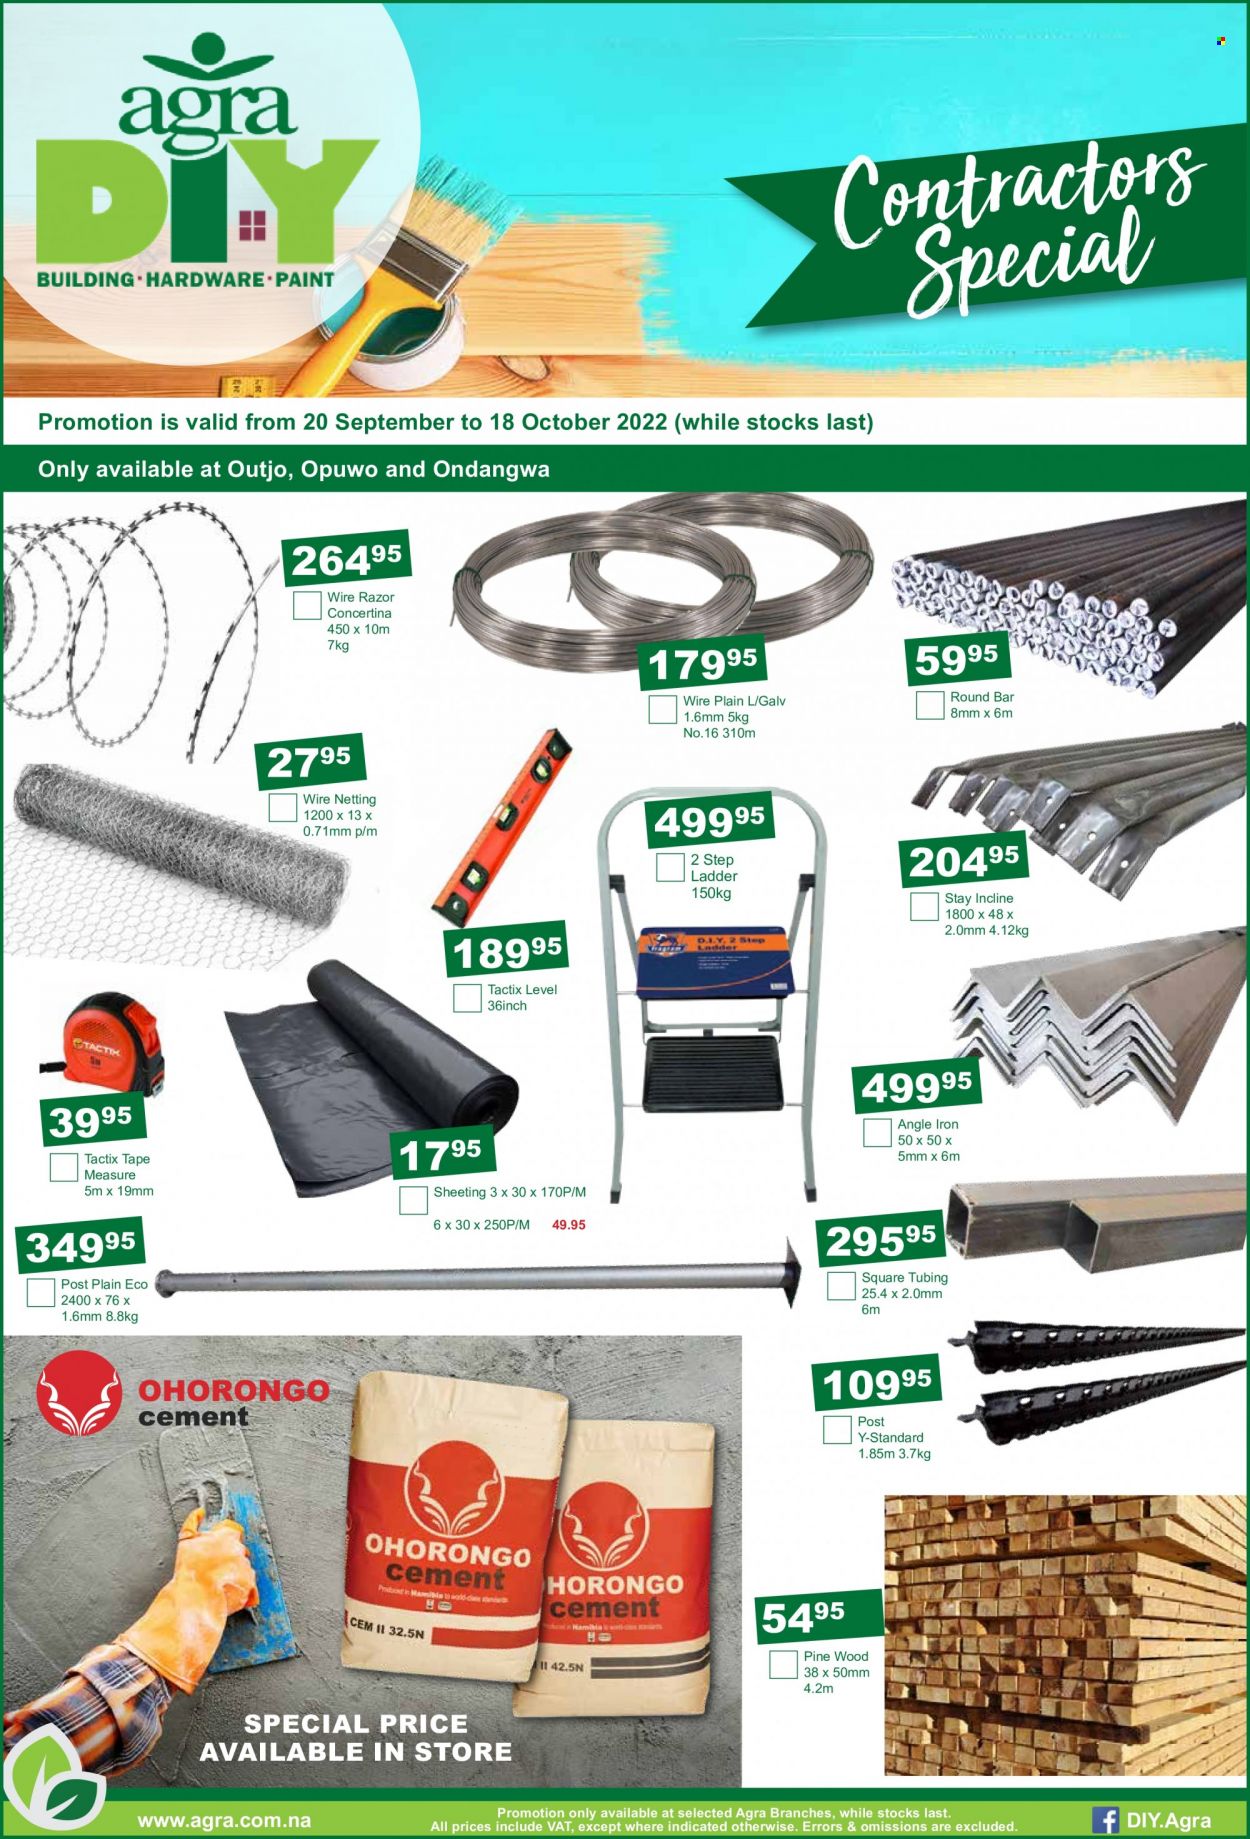 thumbnail - Agra catalogue  - 20/09/2022 - 18/10/2022 - Sales products - ladder, sheeting, paint, measuring tape. Page 10.